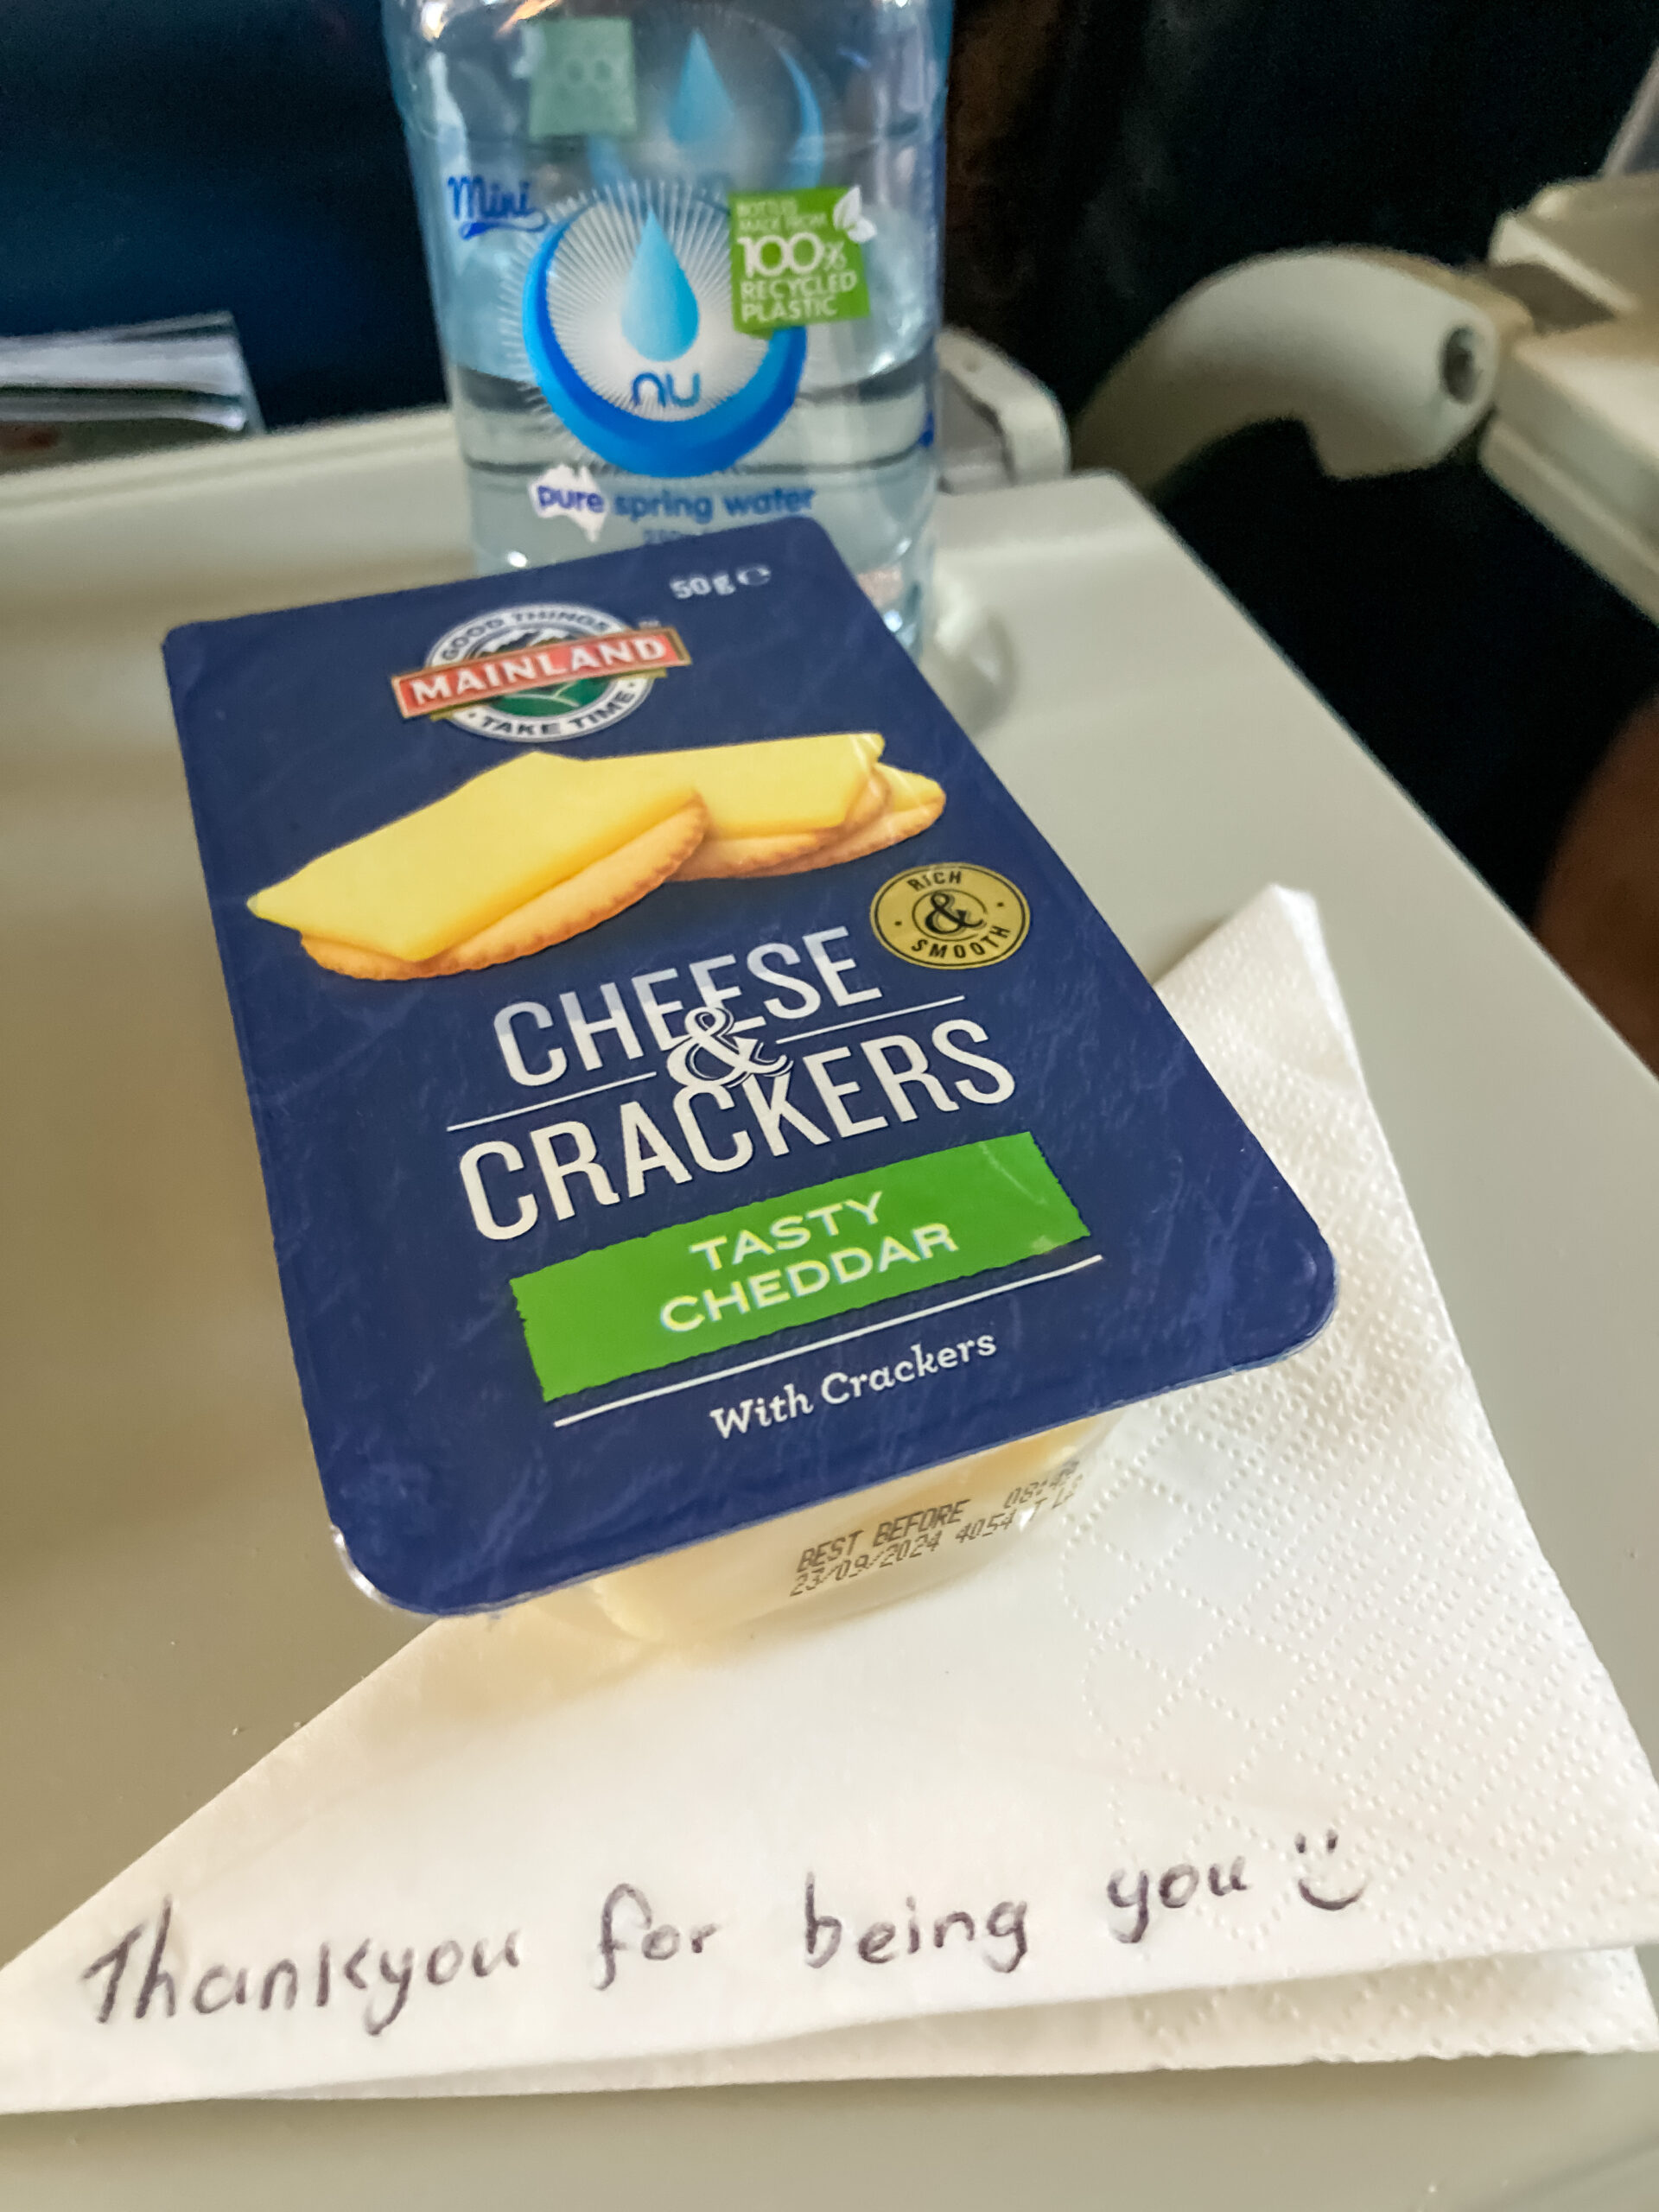 A snack pack of cheese and crackers sitting on a serviette on which the words 'thank you for being you' are written